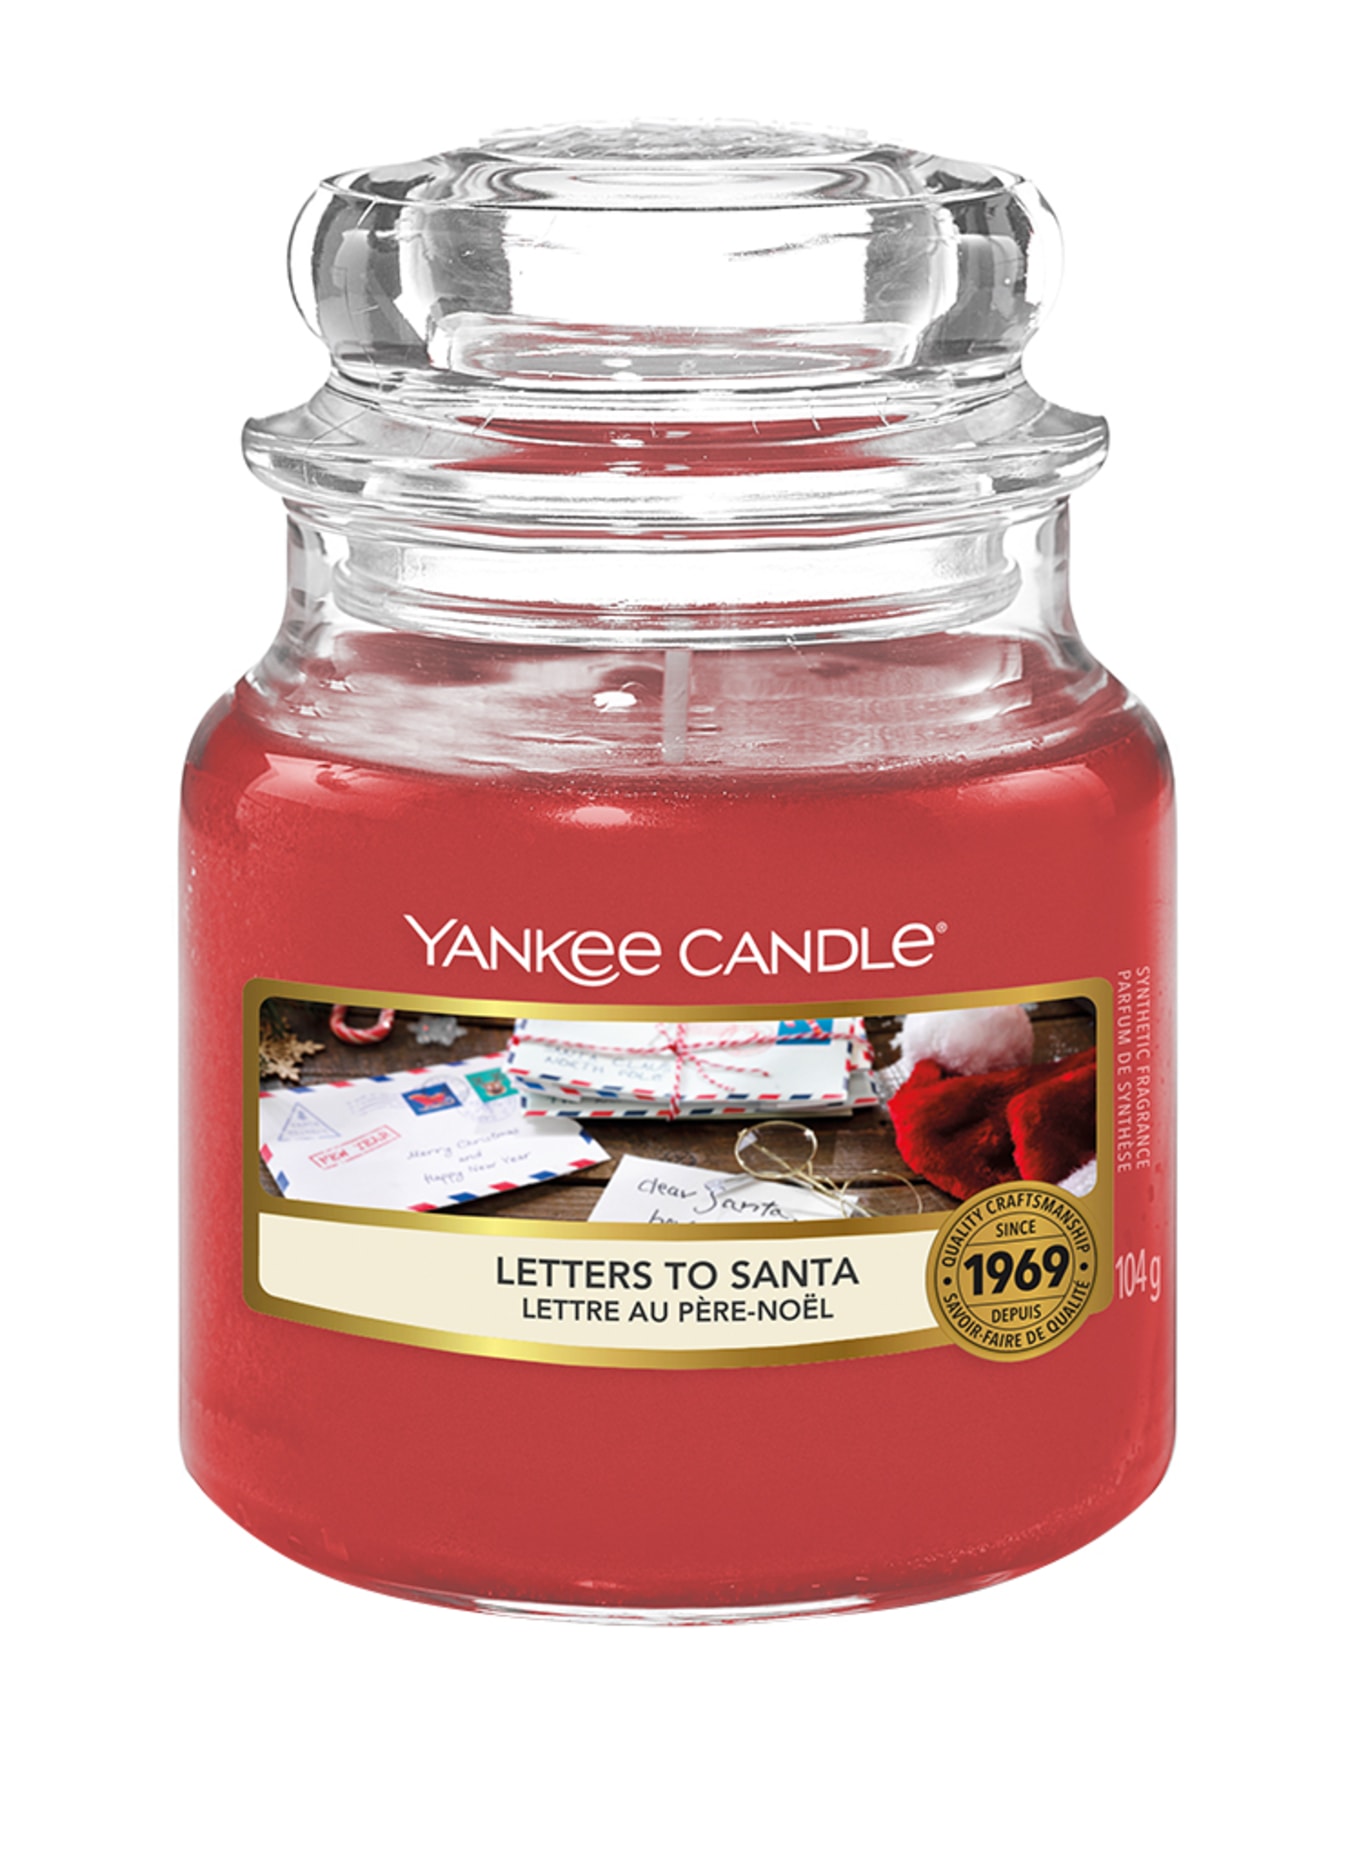 YANKEE CANDLE LETTERS TO SANTA (Bild 1)